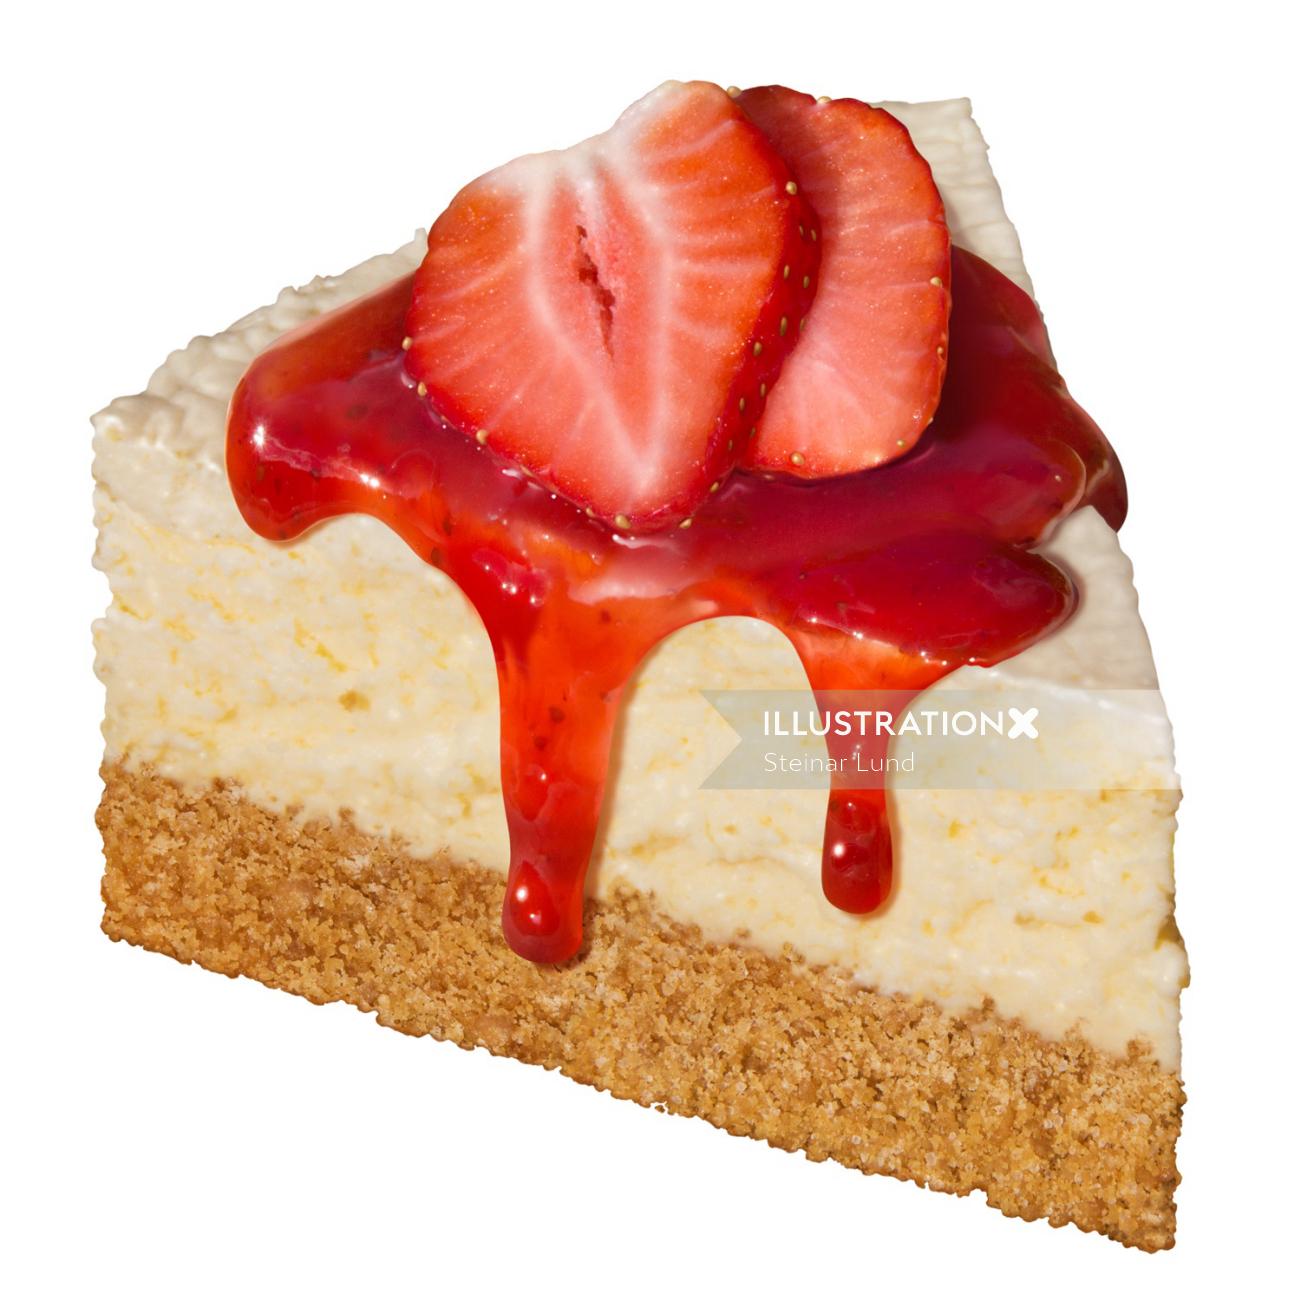 Illustration of Cheesecake with strawberries